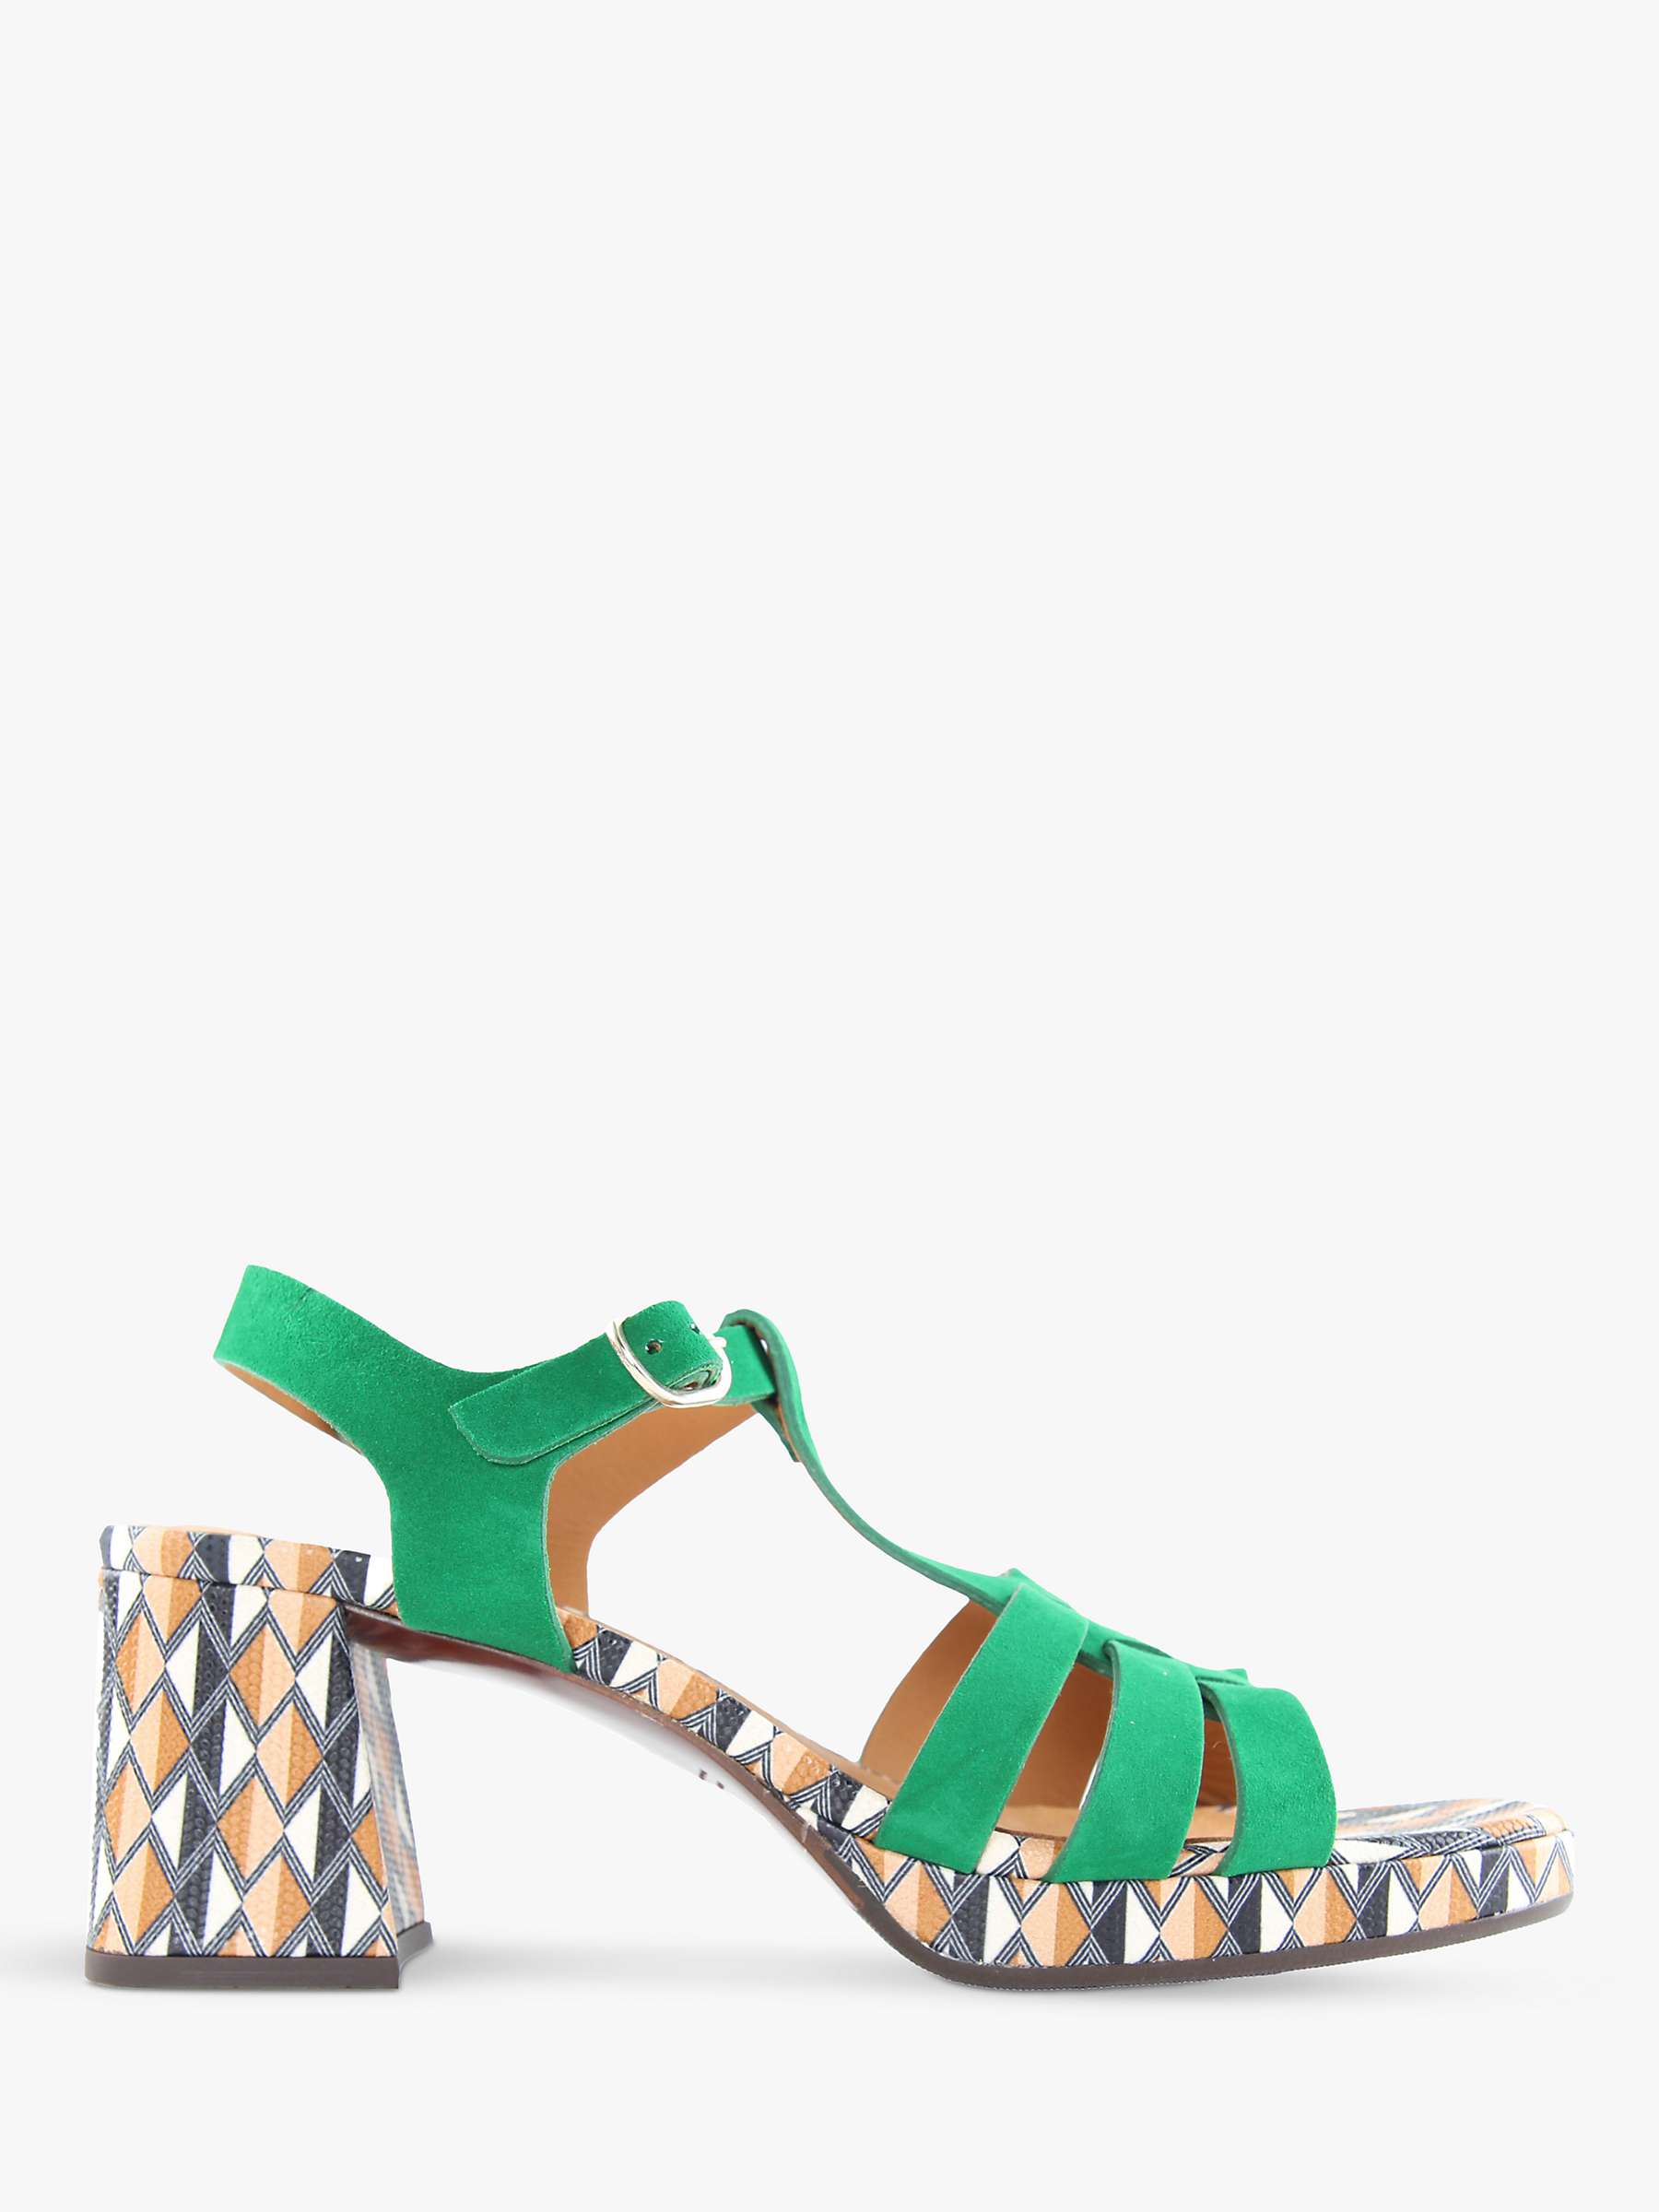 Buy Chie Mihara Gapaxi Leather Sandals, Green/Multi Online at johnlewis.com